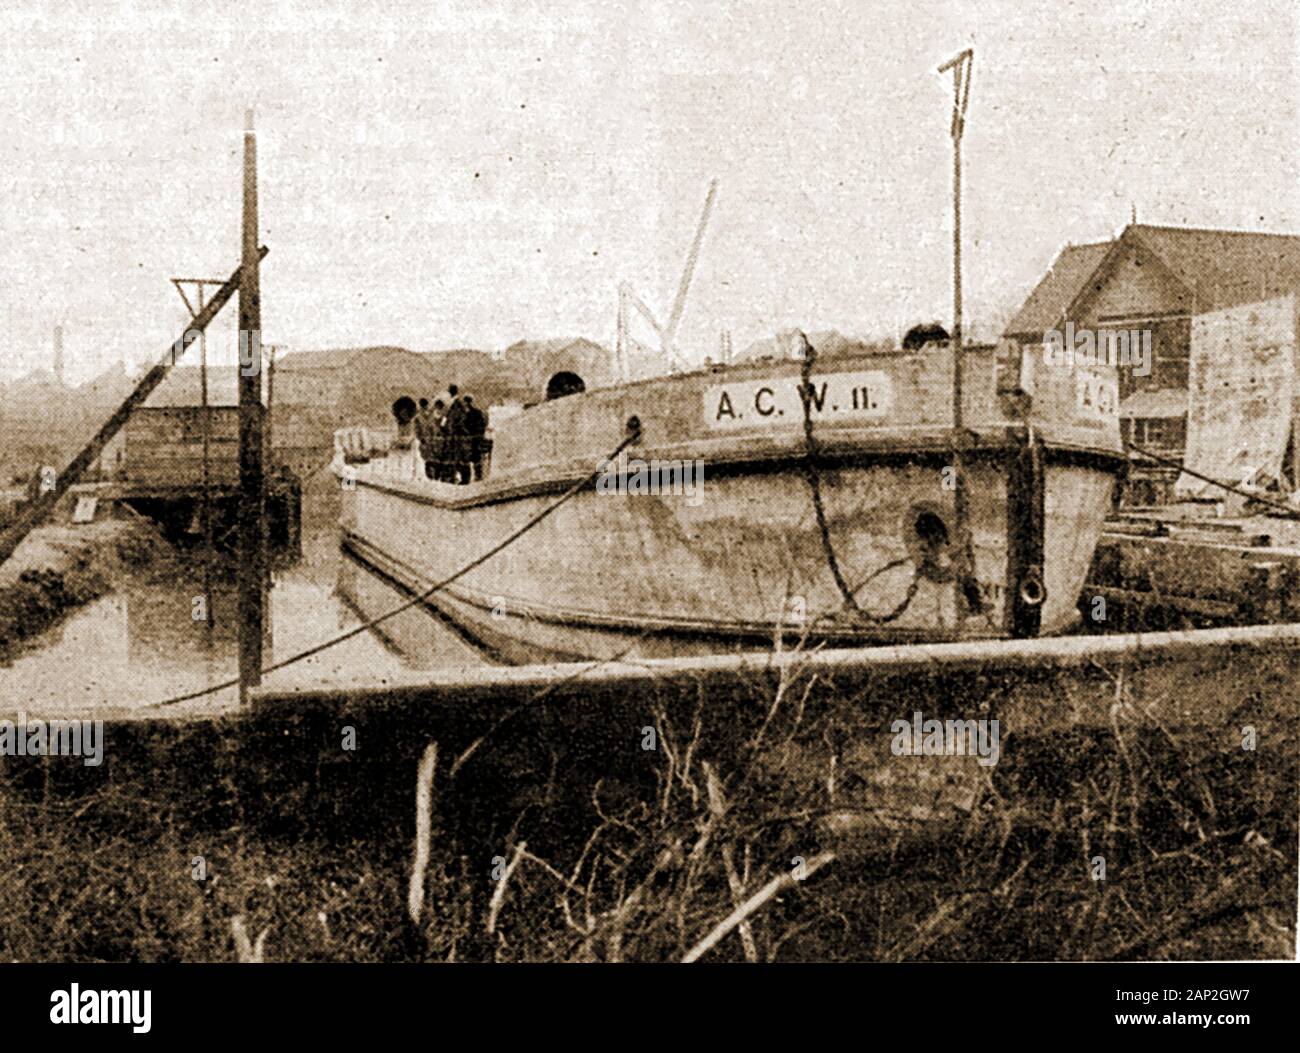 WWI - A British concrete ship A C W II docked at Brentford Stock Photo